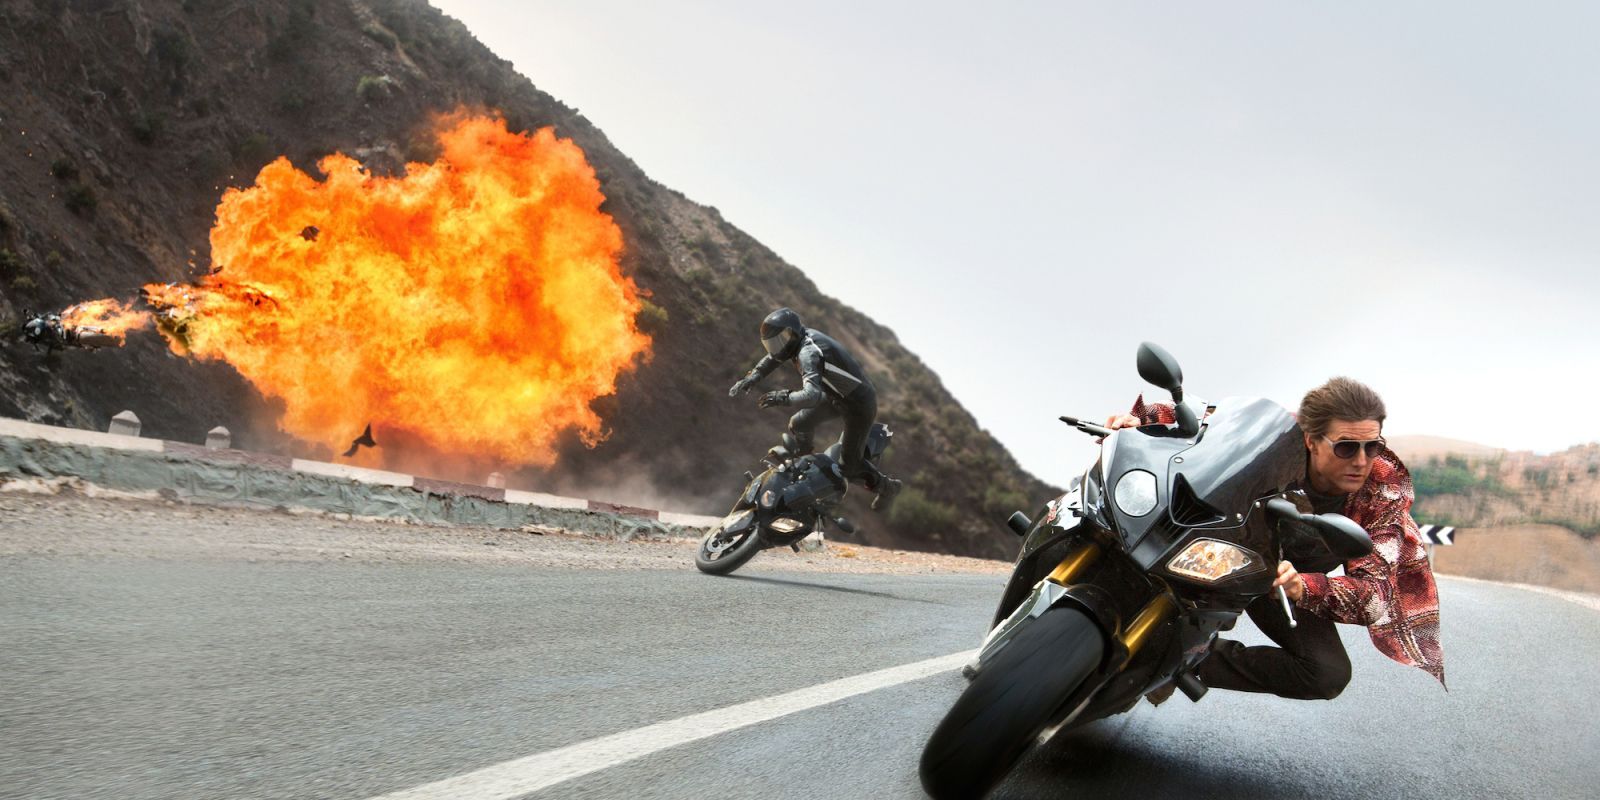 Tom Cruise riding a motorcycle in Mission: Impossible - Rogue Nation.